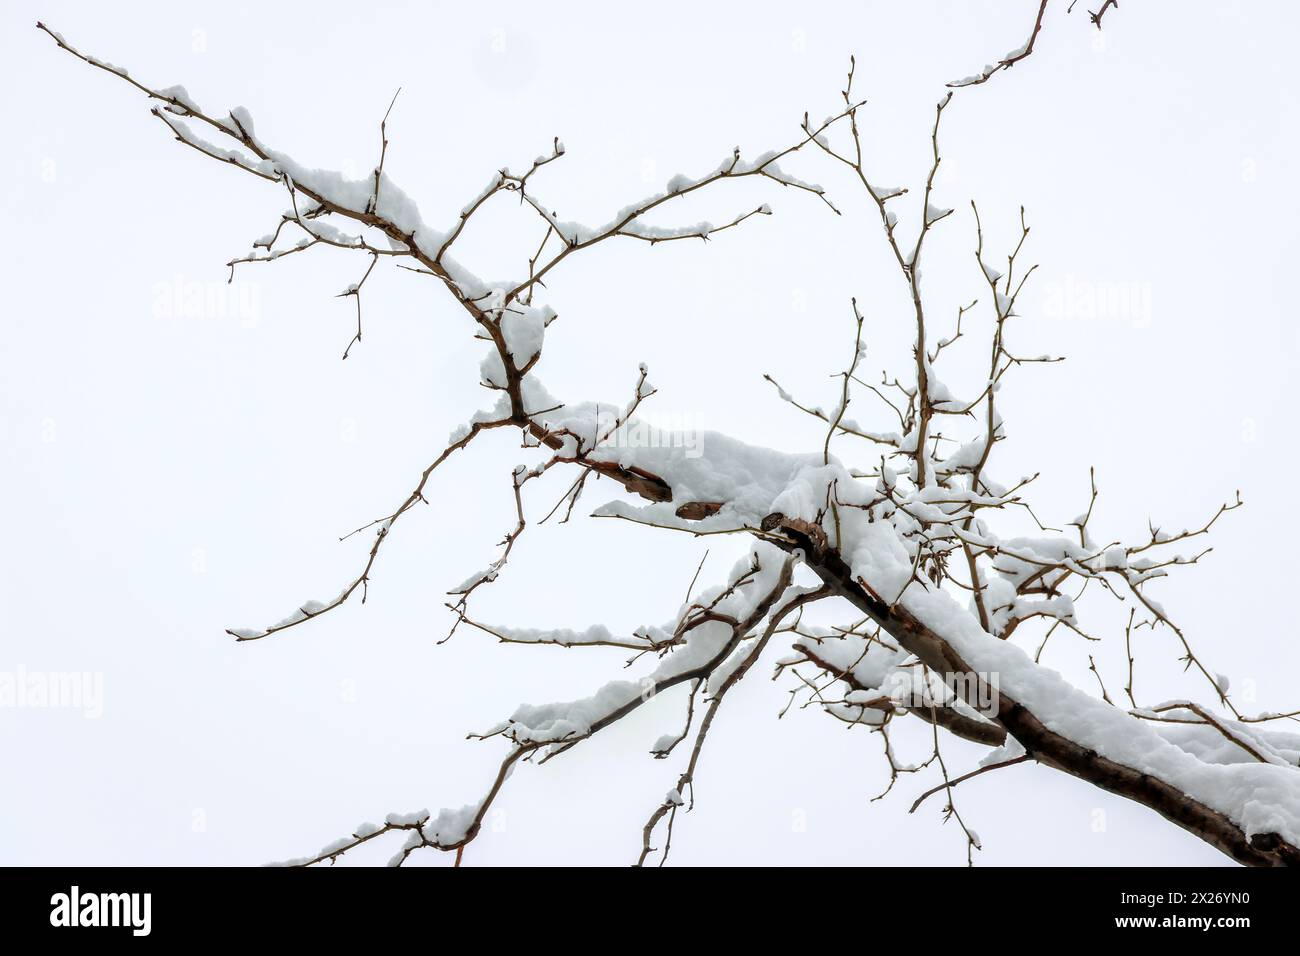 Huaxian County, Henan Province: Silver covered trees after snow Stock Photo